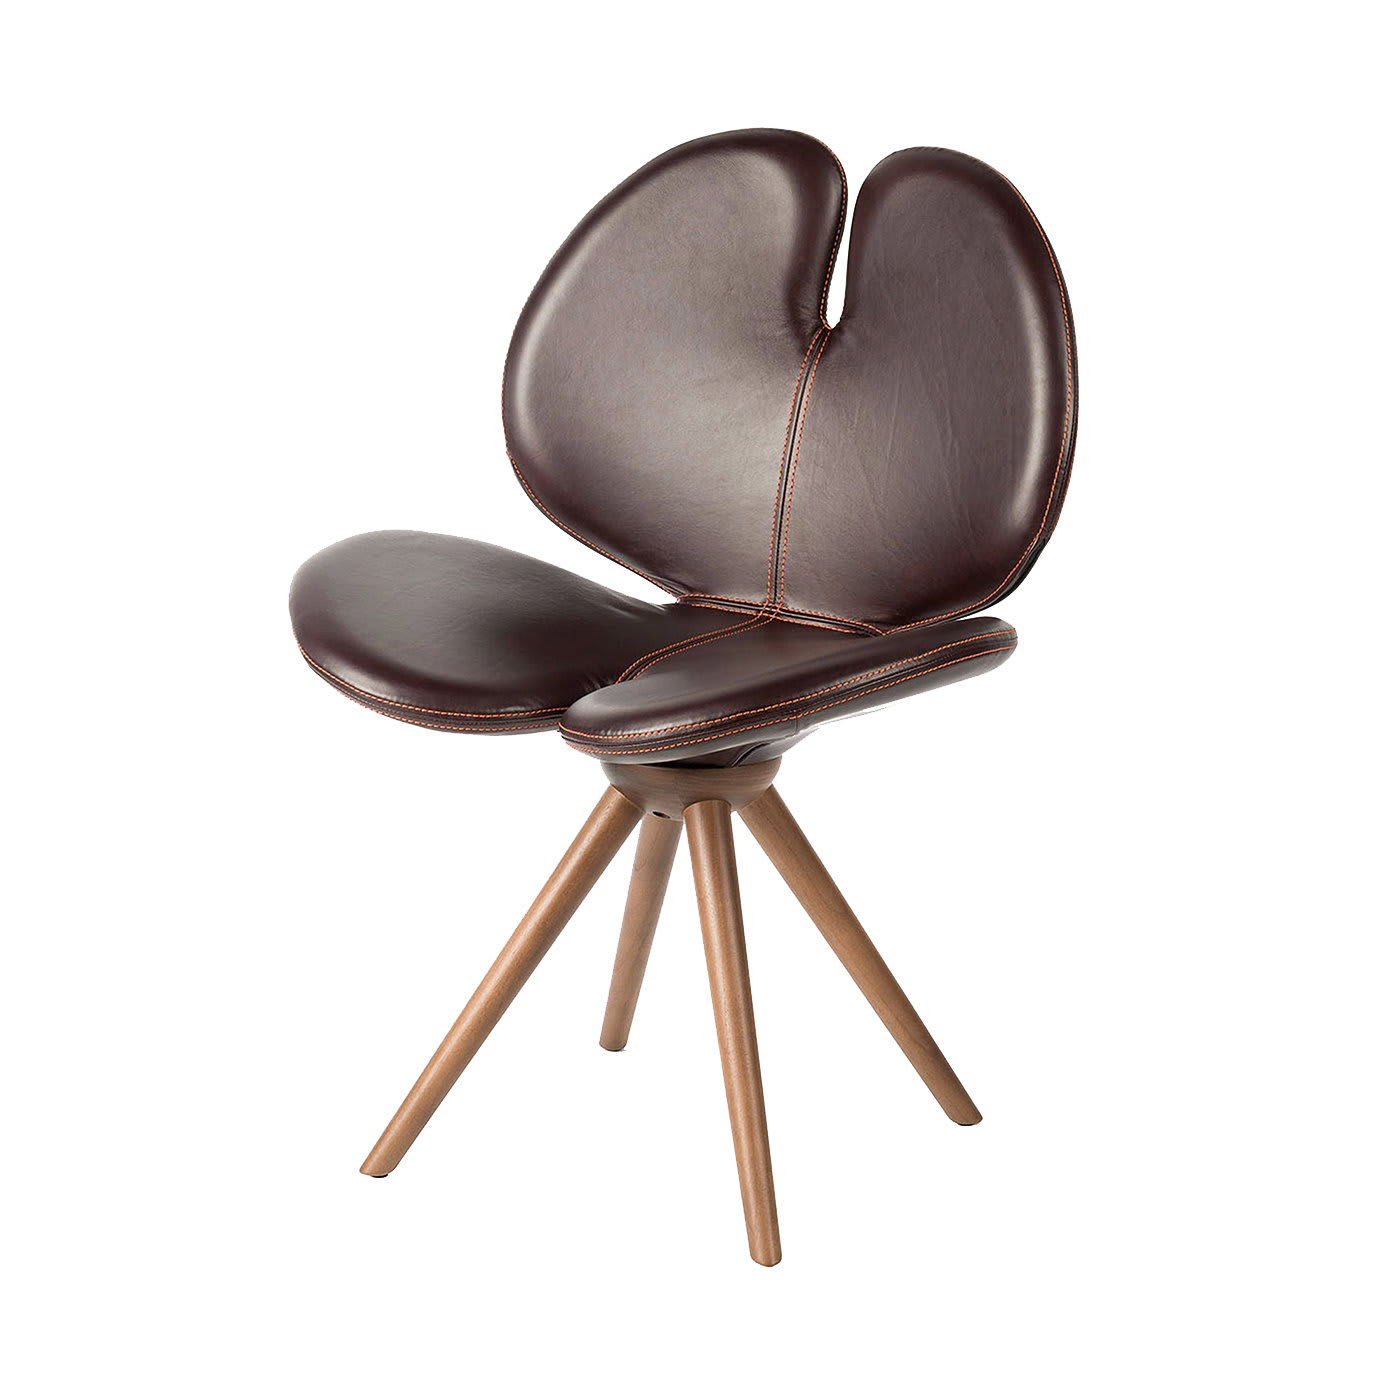 New Pansè Leather and Wood Chair - VGnewtrend